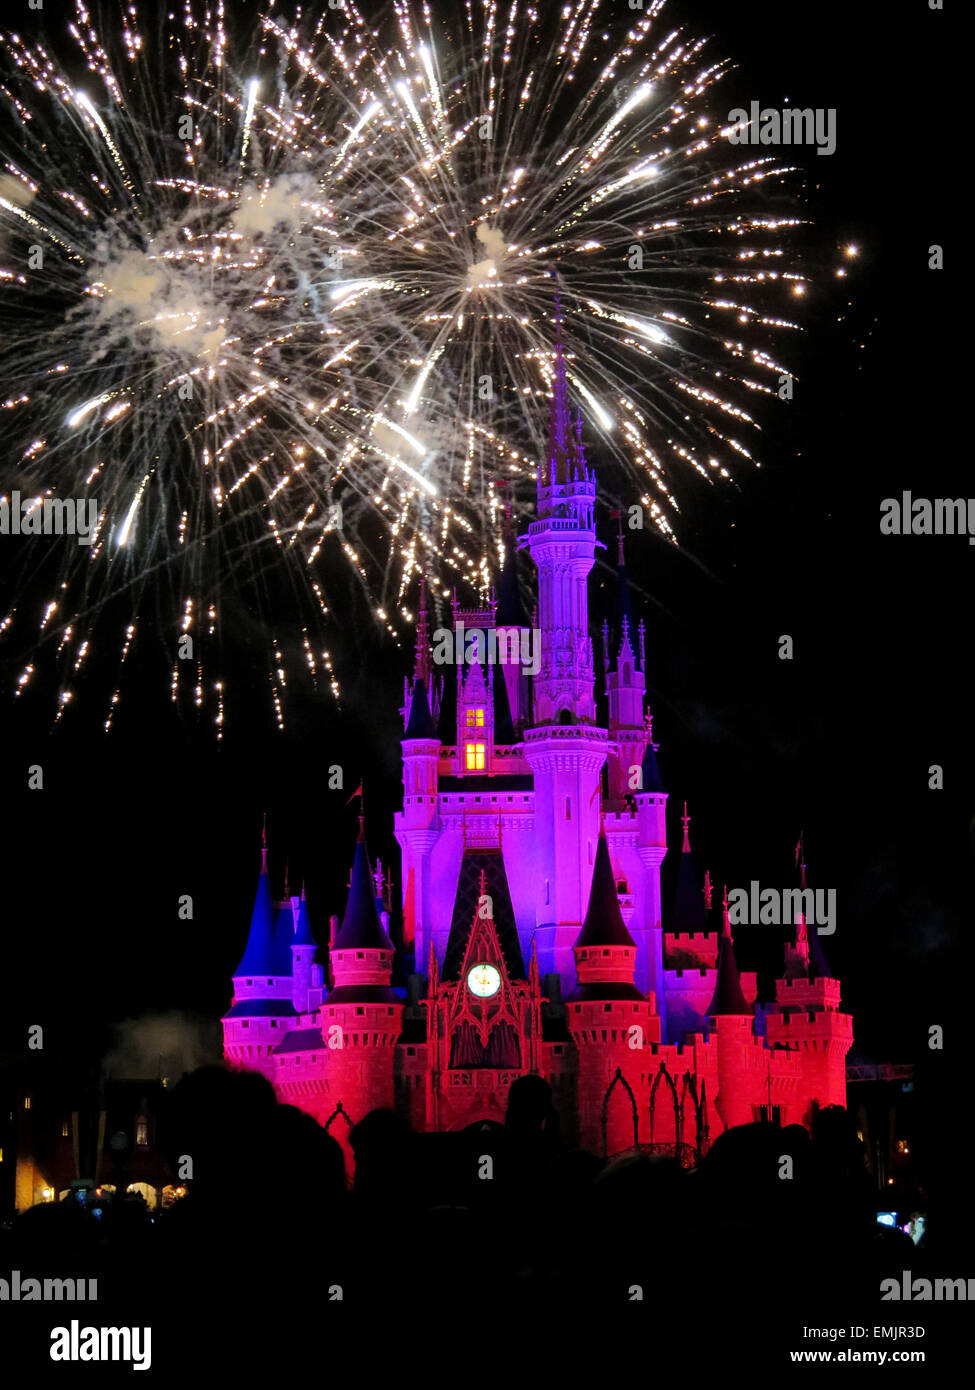 The famous Wishes nighttime spectacular fireworks at the Disney Magic Kingdom Castle in Orlando, Florida, on febrary 7, 2015 Stock Photo